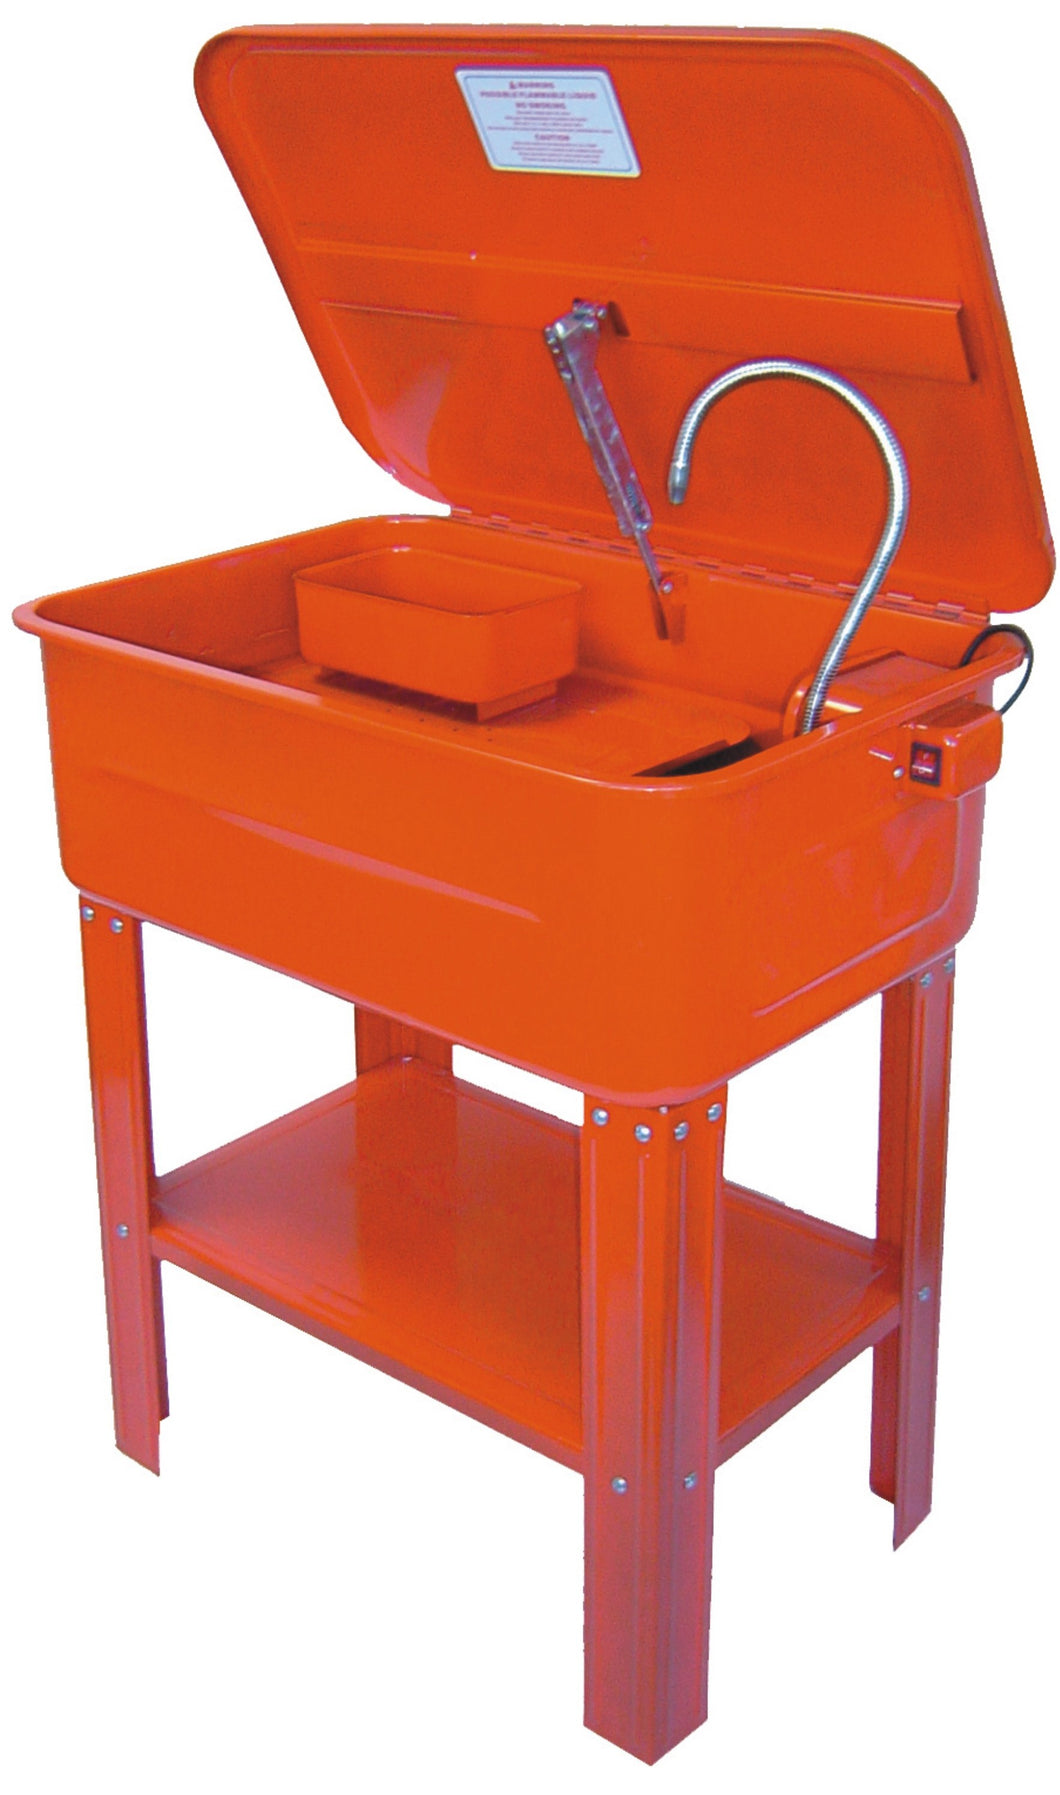 Valley 20 Gallon Parts Washer with Stand